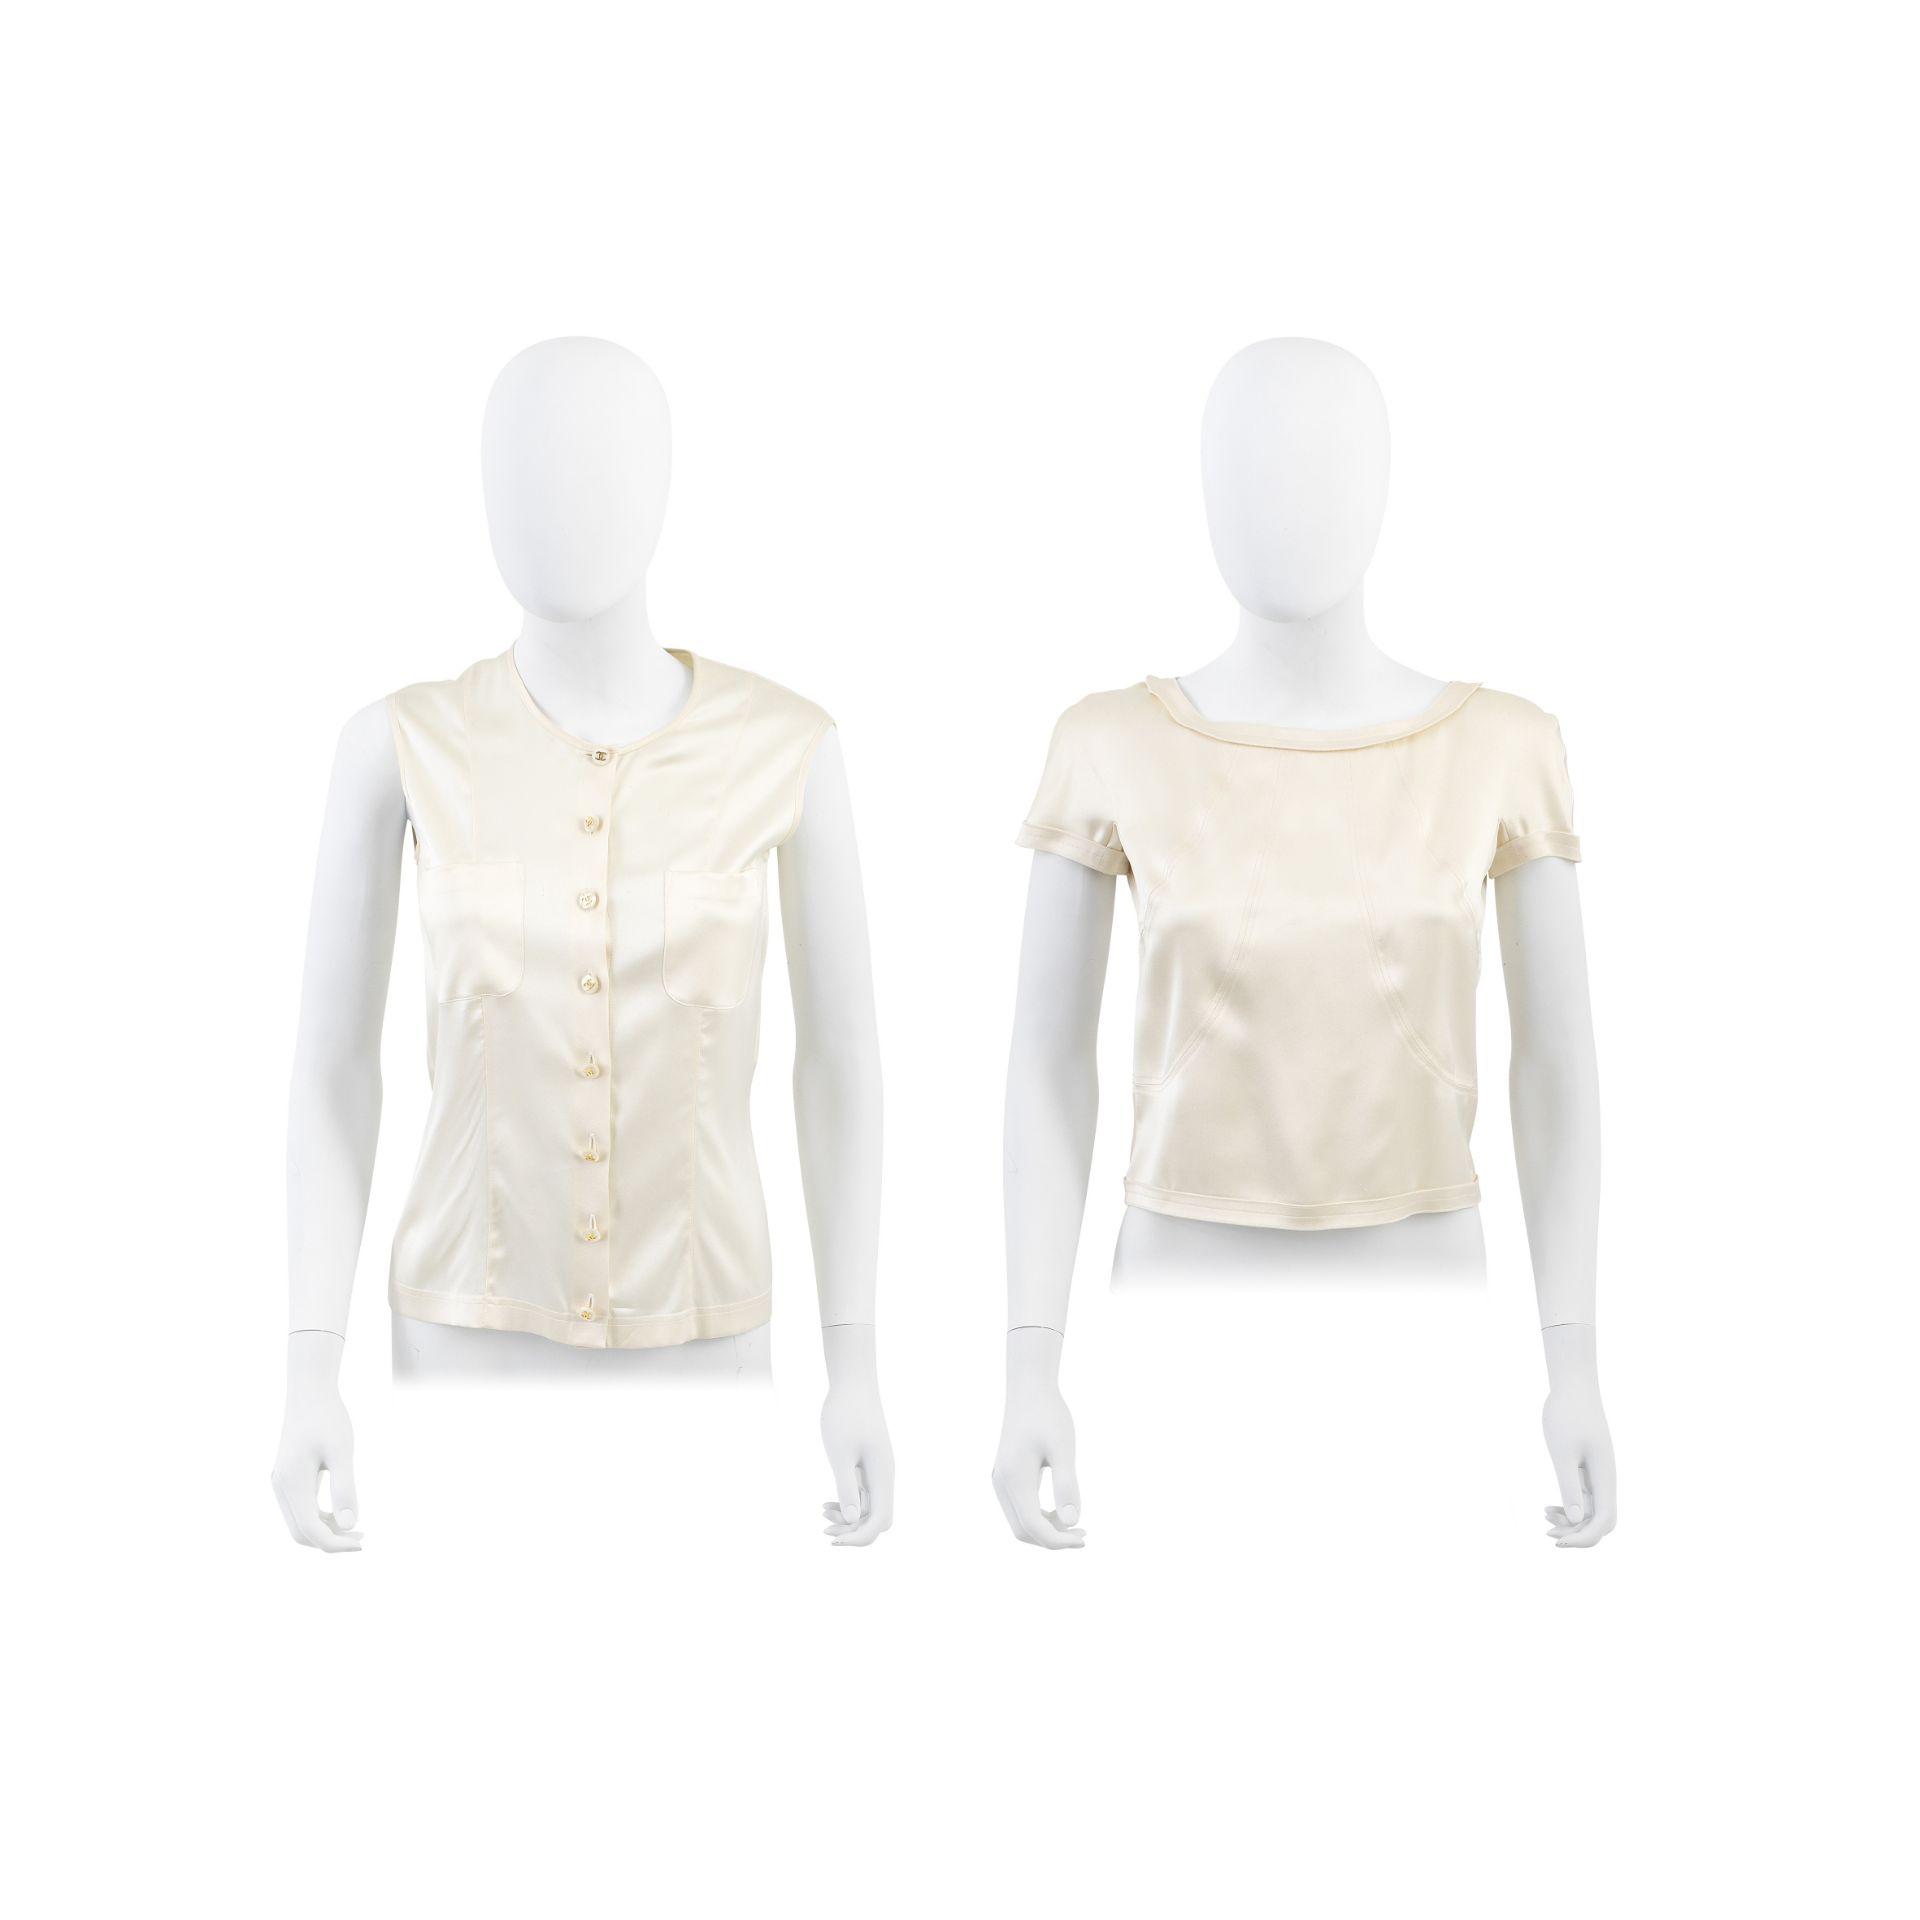 Two Cream Silk Tops, Chanel, 1980s and 2003,